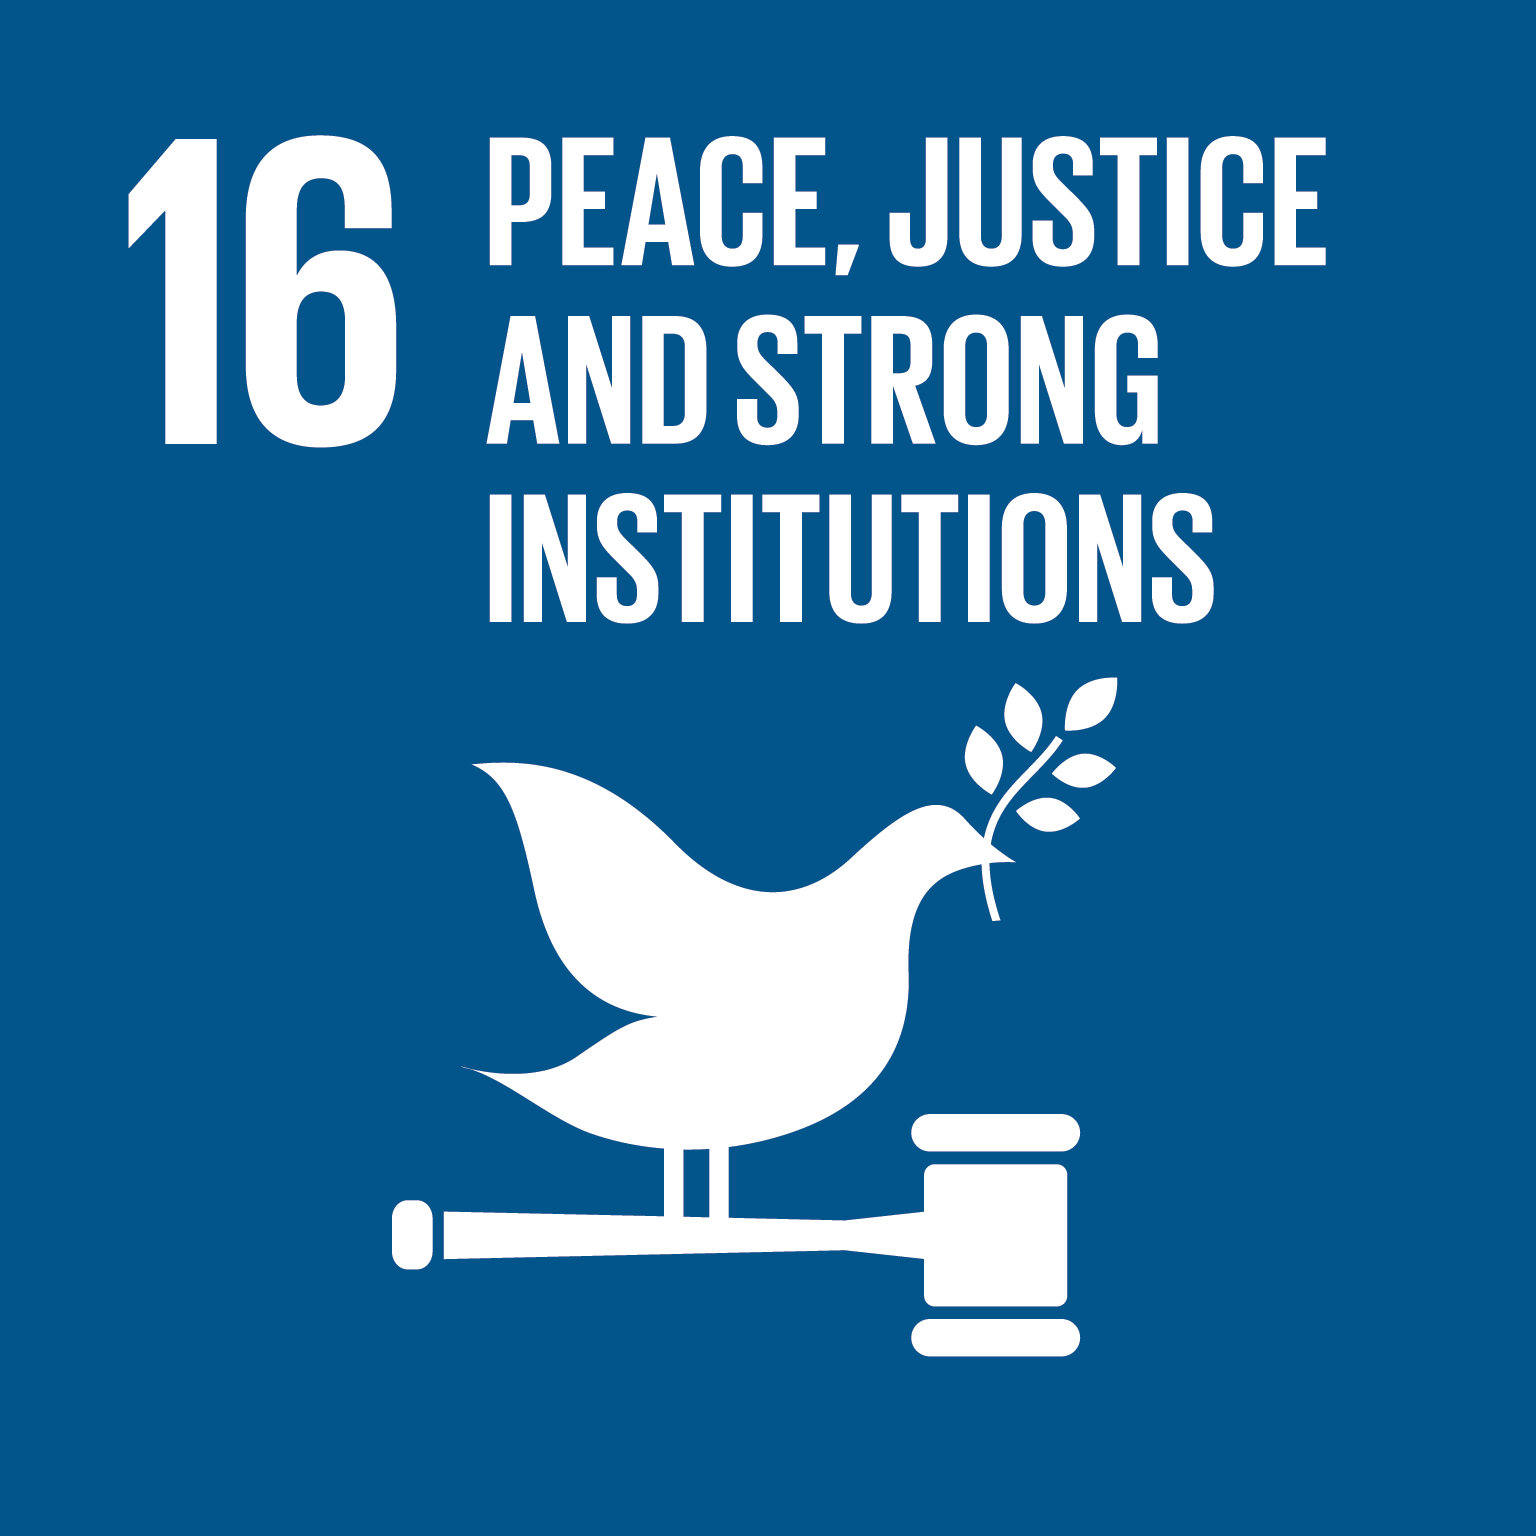 icon for Goal 16 - Promote peaceful and inclusive societies for sustainable development, provide access to justice for all and build effective, accountable and inclusive institutions at all levels